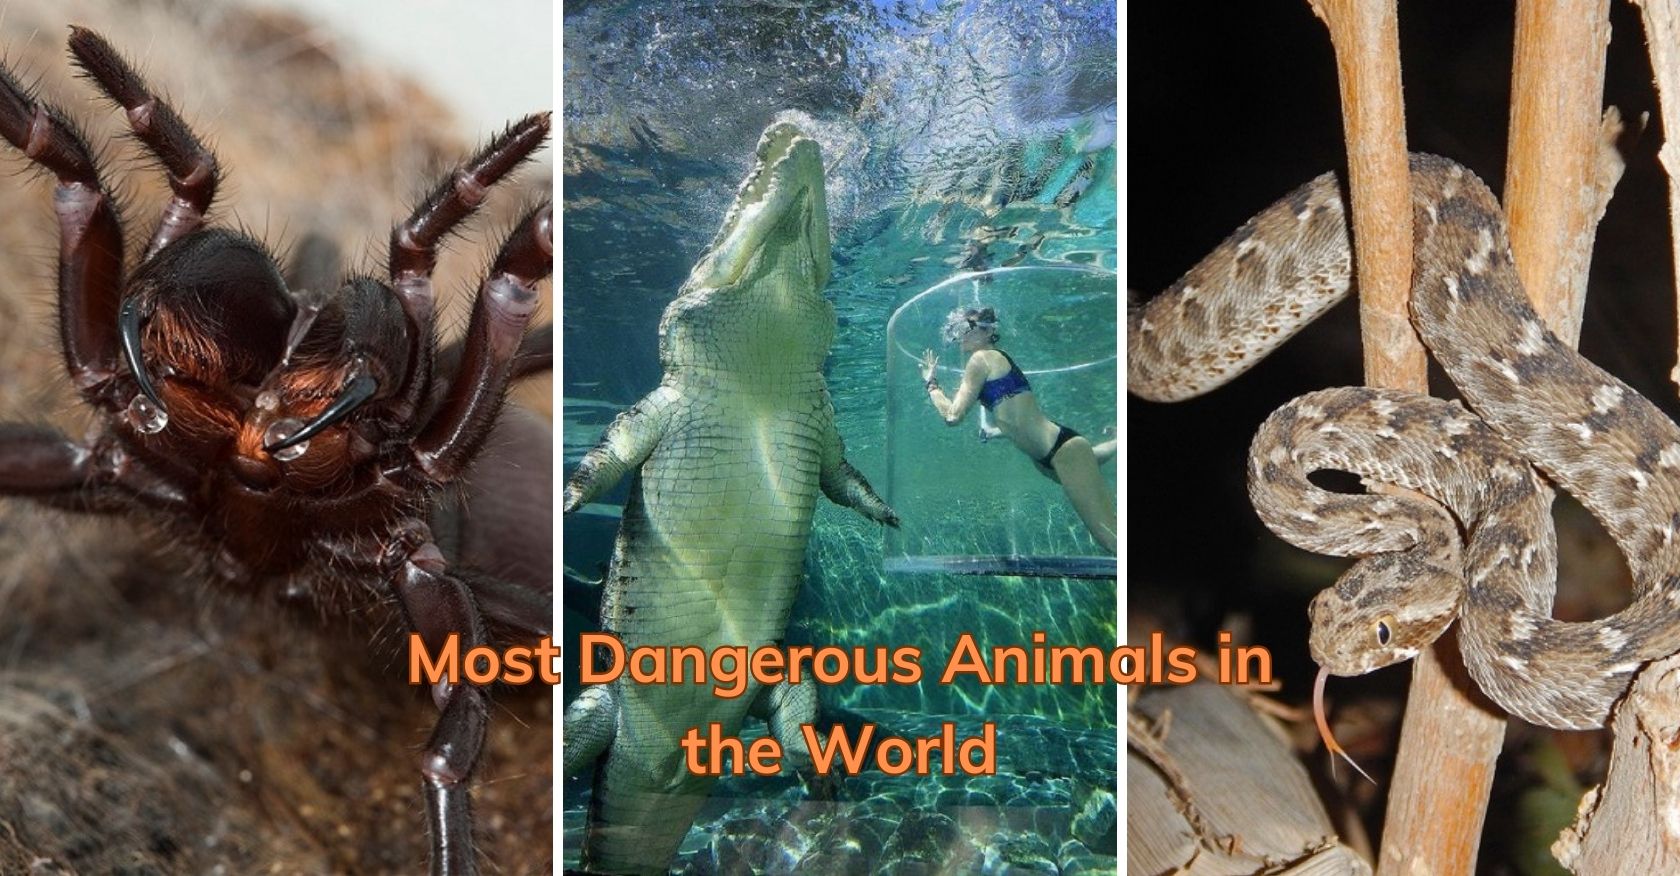 Most Dangerous Animals in the World